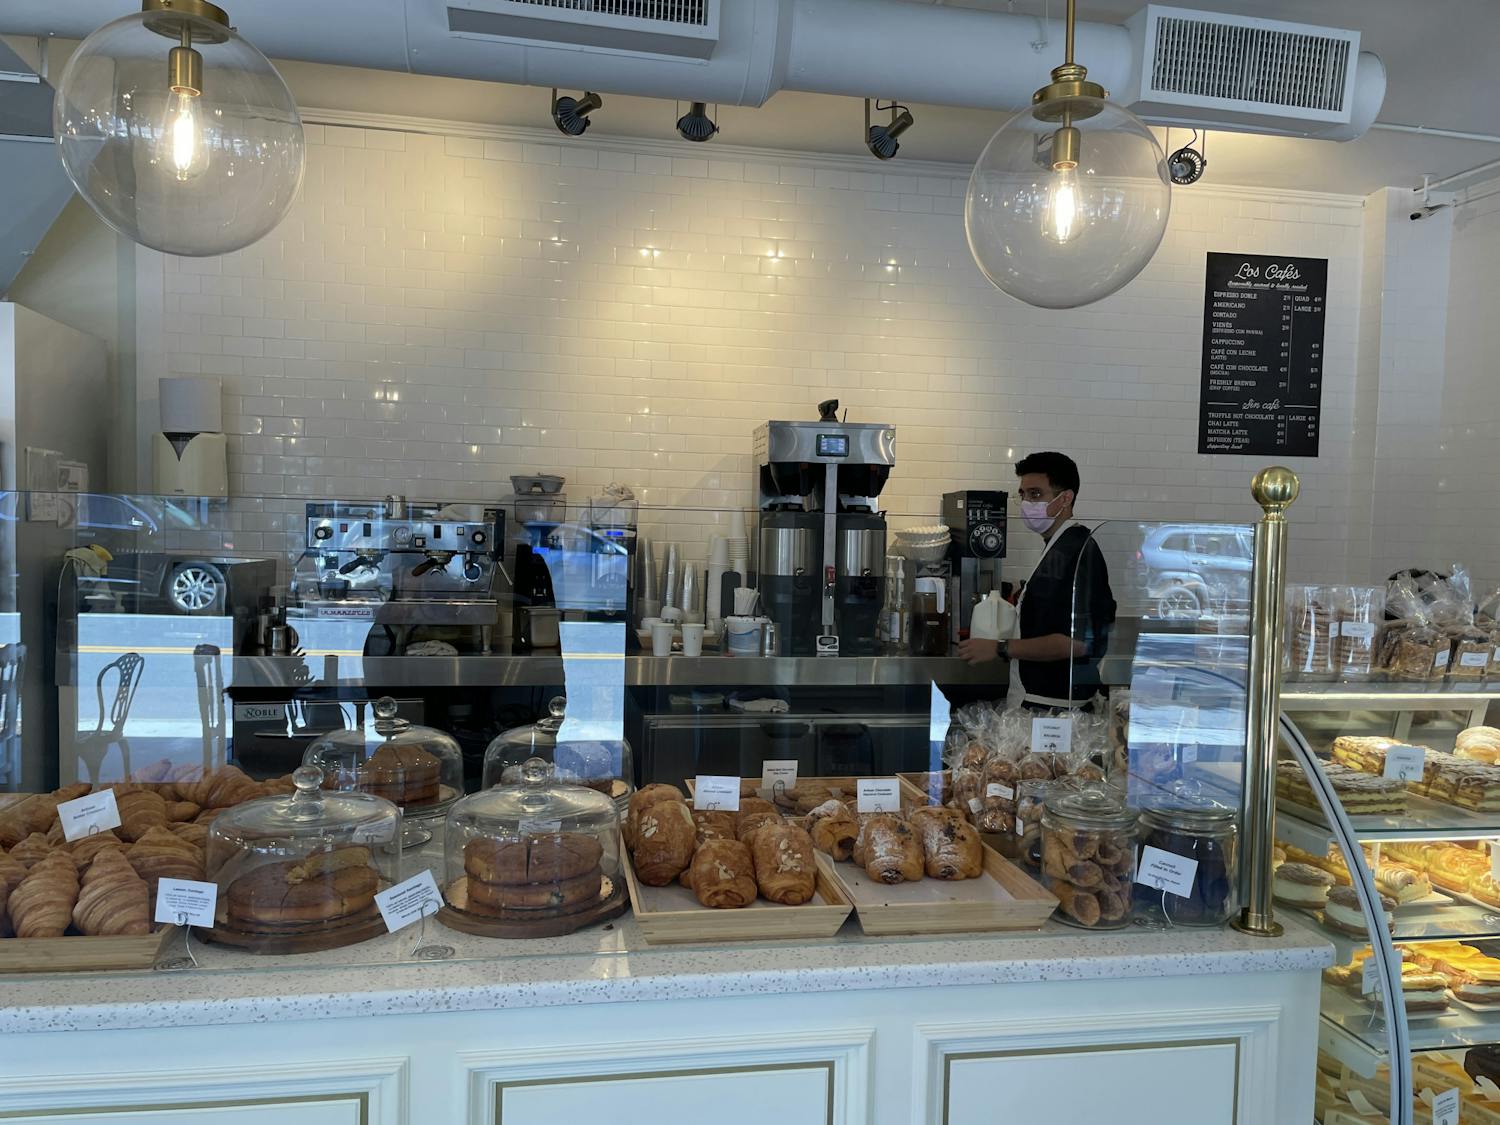 Spanish baker Sergio Mendoza welcomes customers to family-owned Madrid European Bakery and Patisserie.